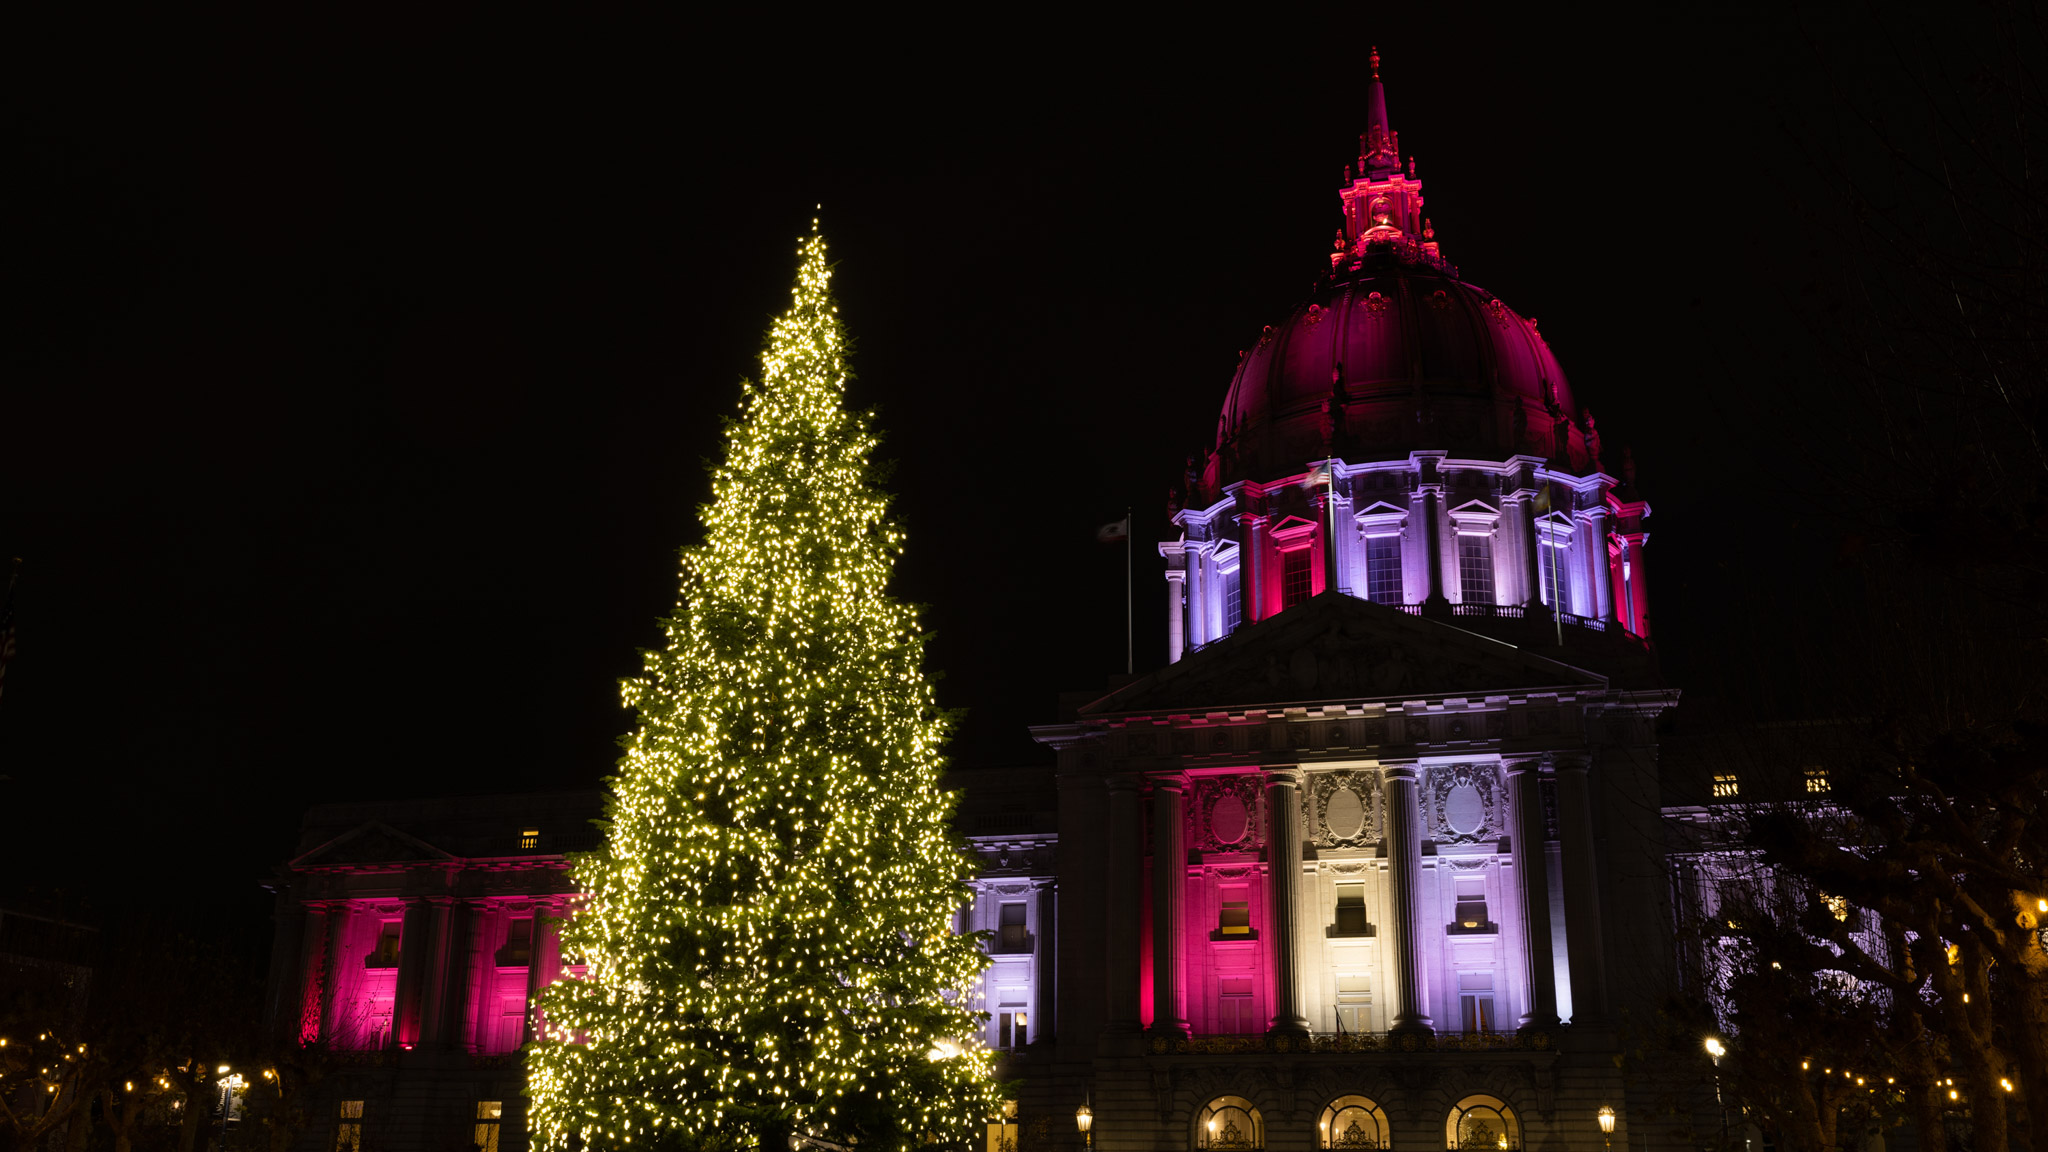 An illuminated Christmas tree stands in front of a lit up San Francisco City Hall at night on Dec. 9, 2022.